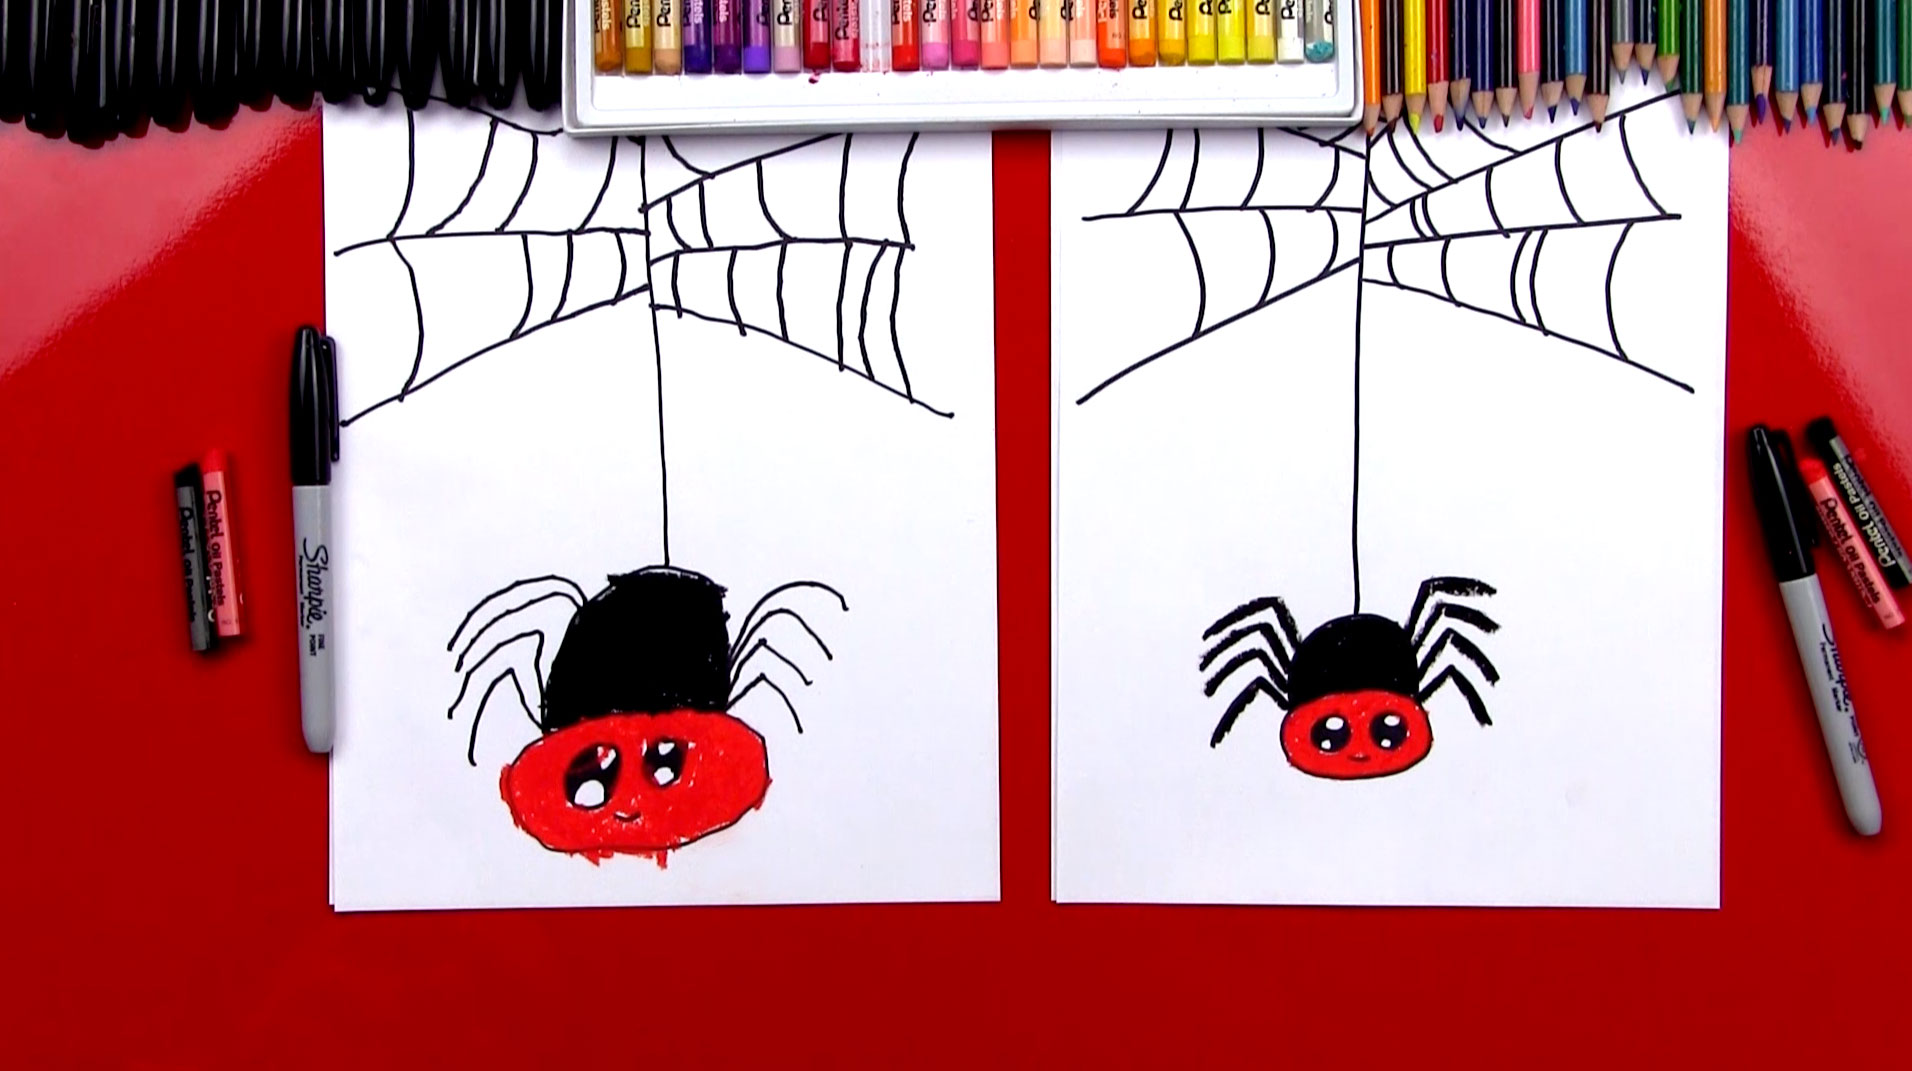 How To Draw A Cartoon Spider - Art For Kids Hub